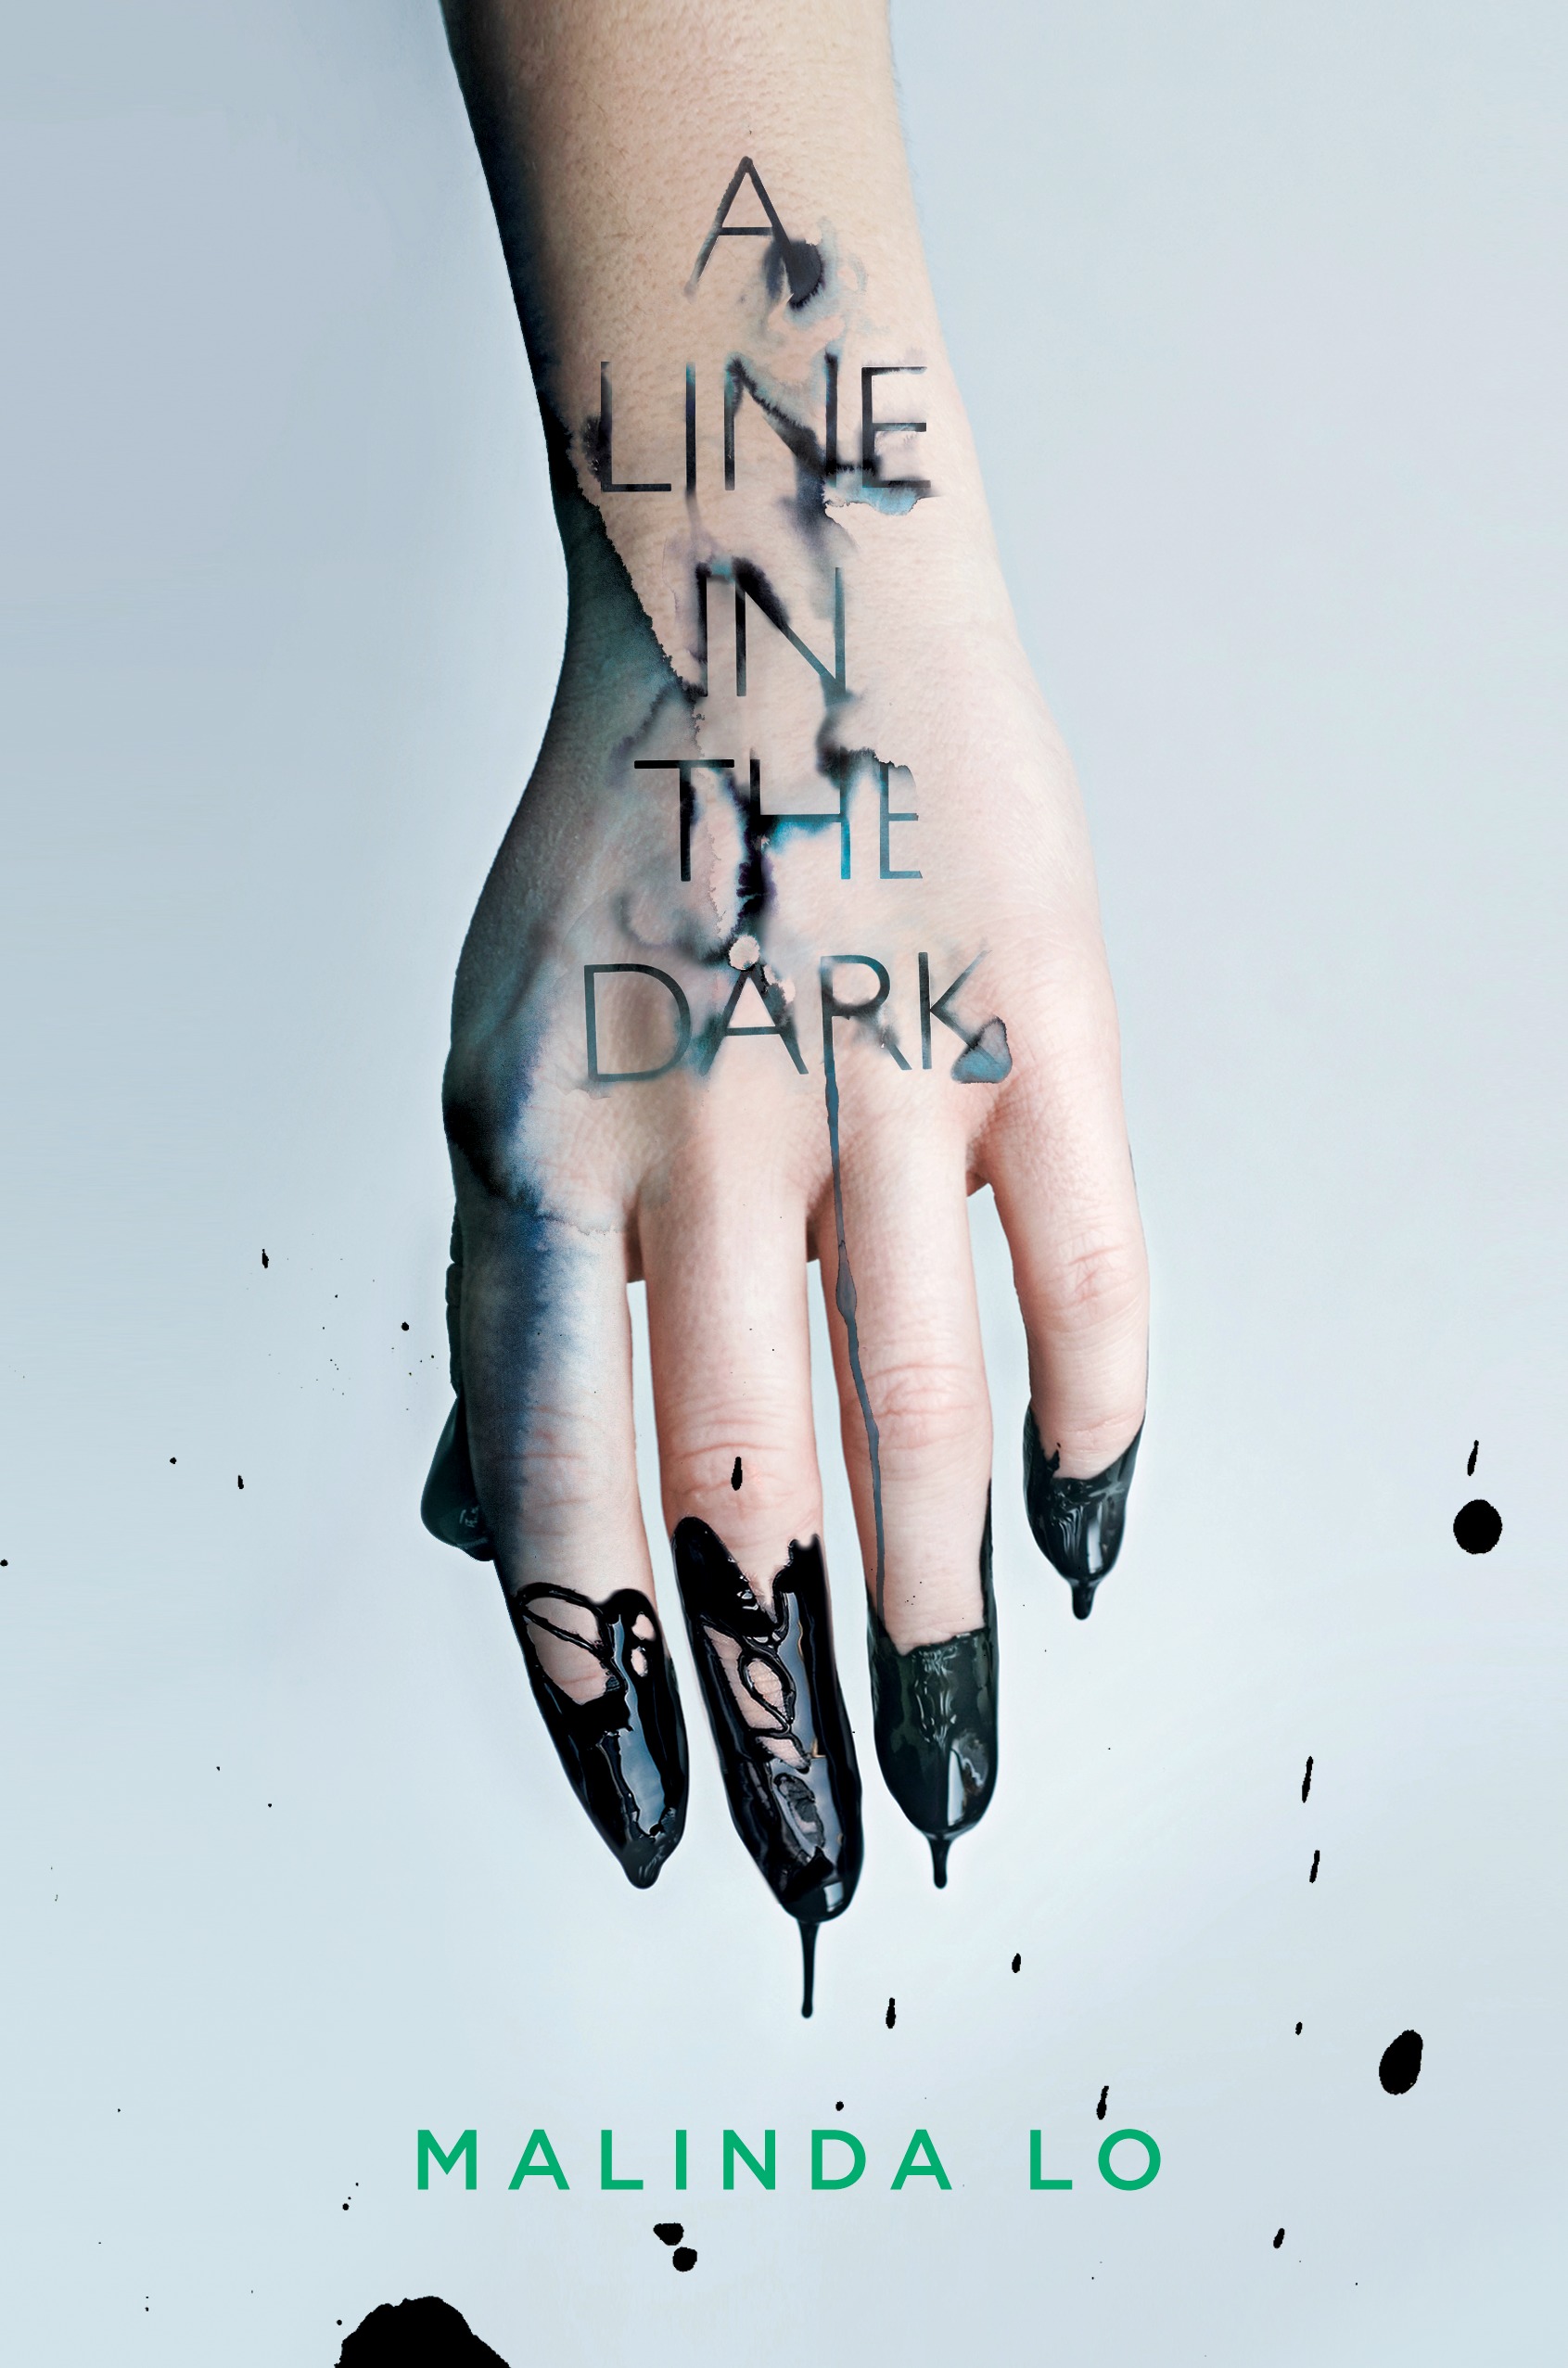 A Line In The Dark.